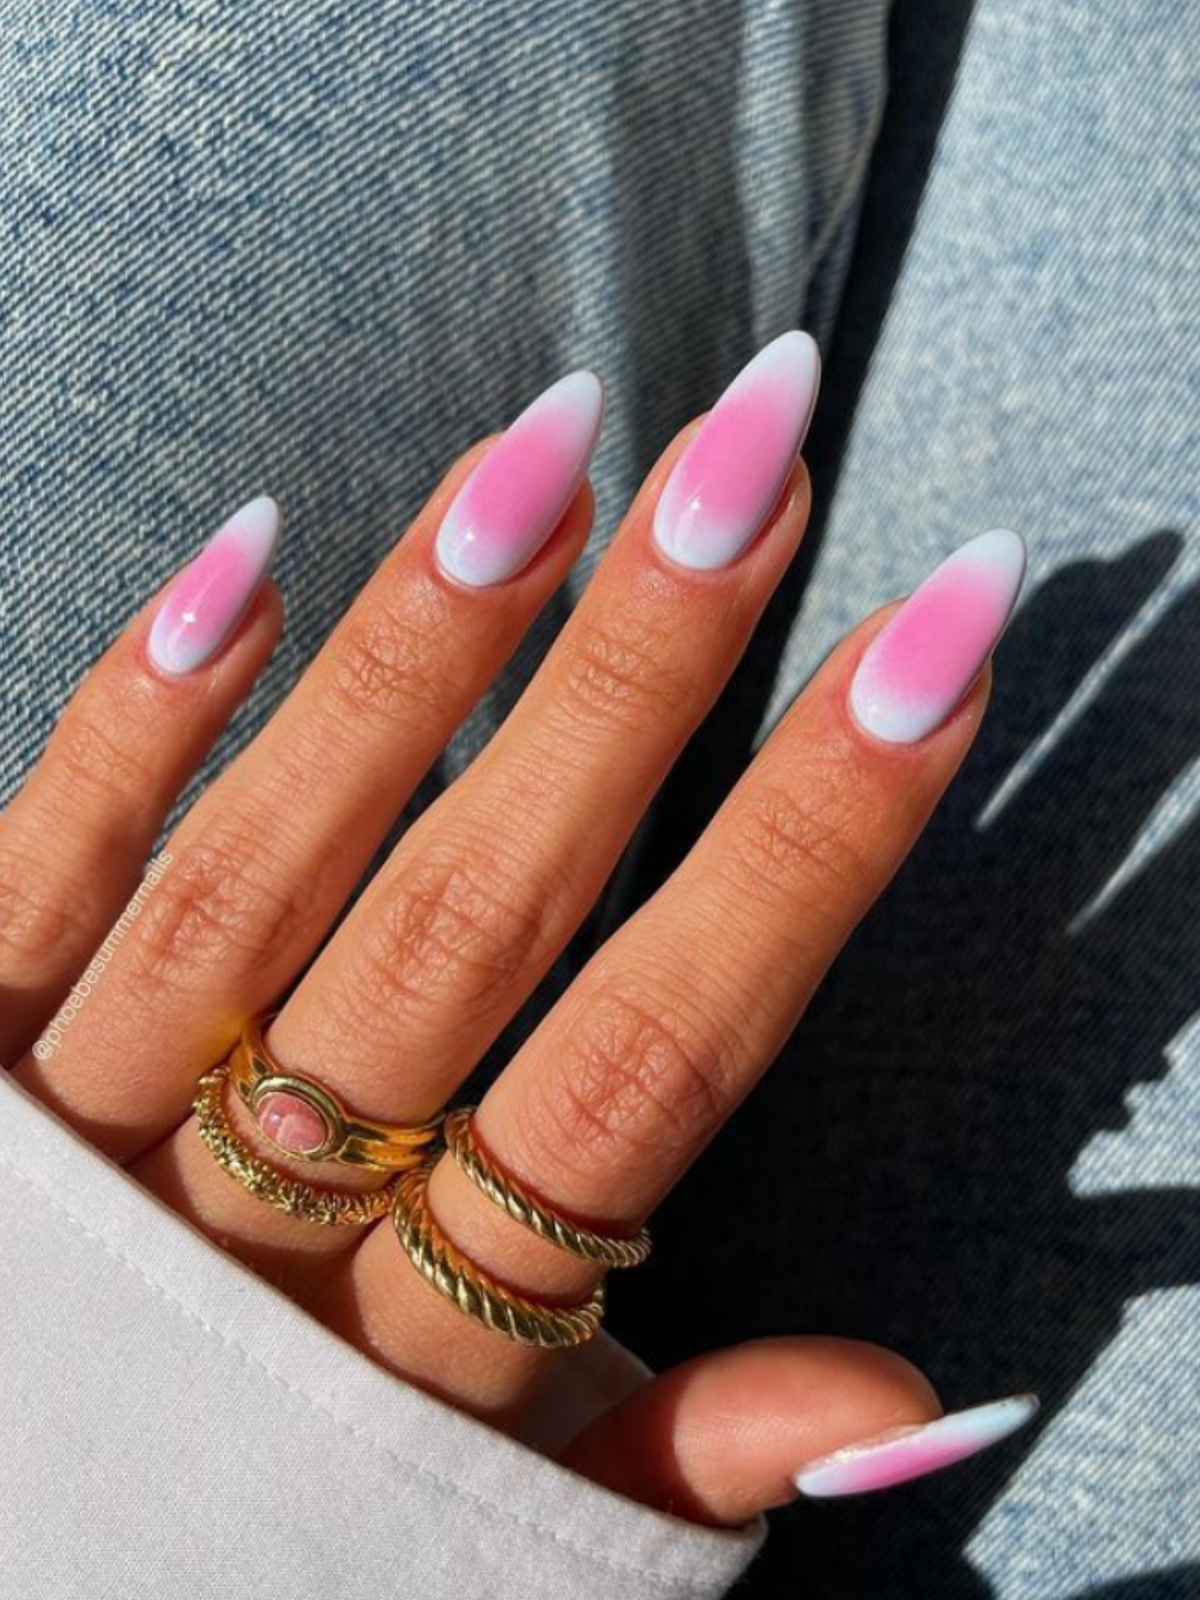 Aura nails the trend inspired by your chakra photo